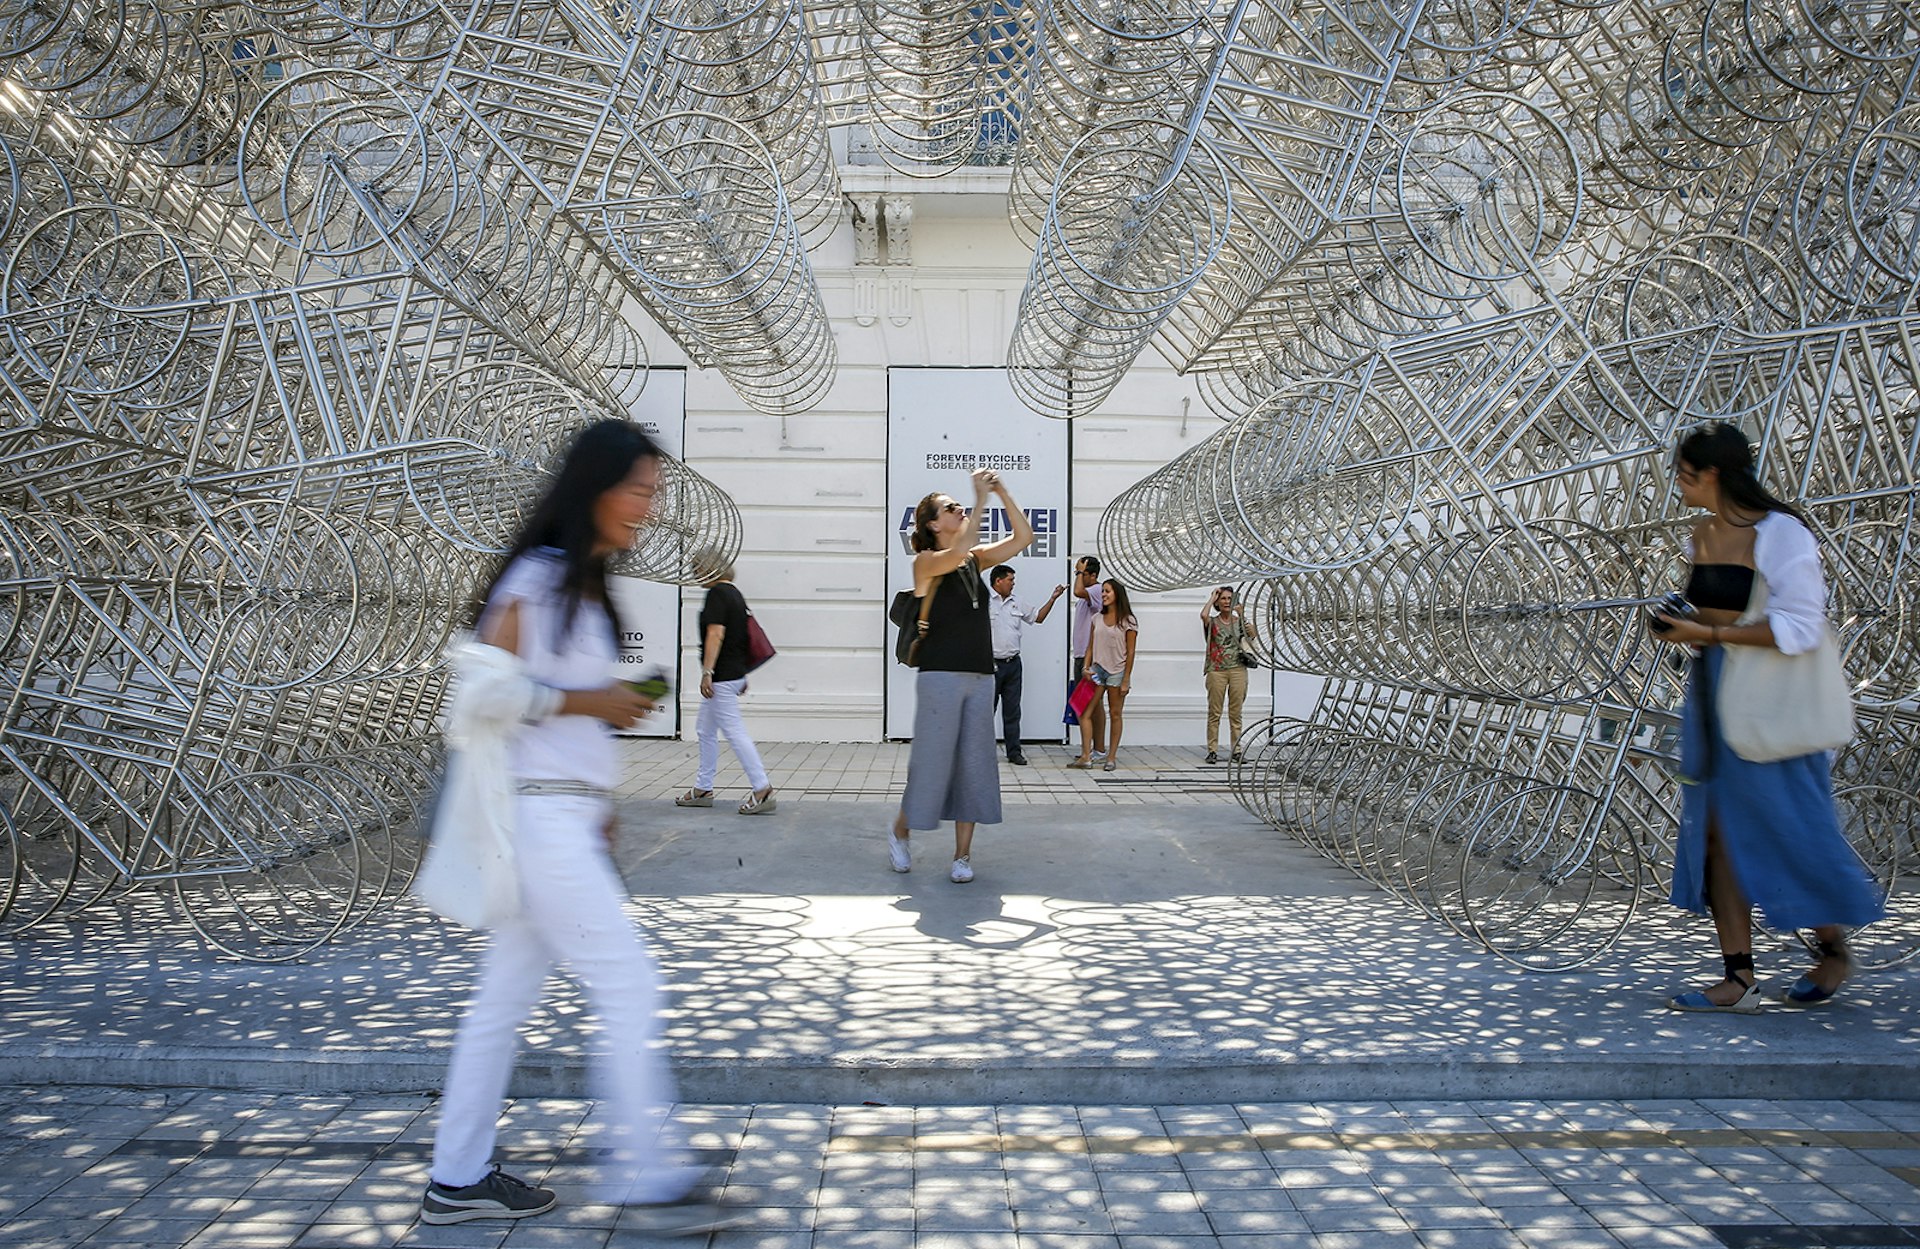 People walk past and take pictures of an Ai Wei Wei art installation, a tunnel made out of dozens of silver metal bicycle sculptures